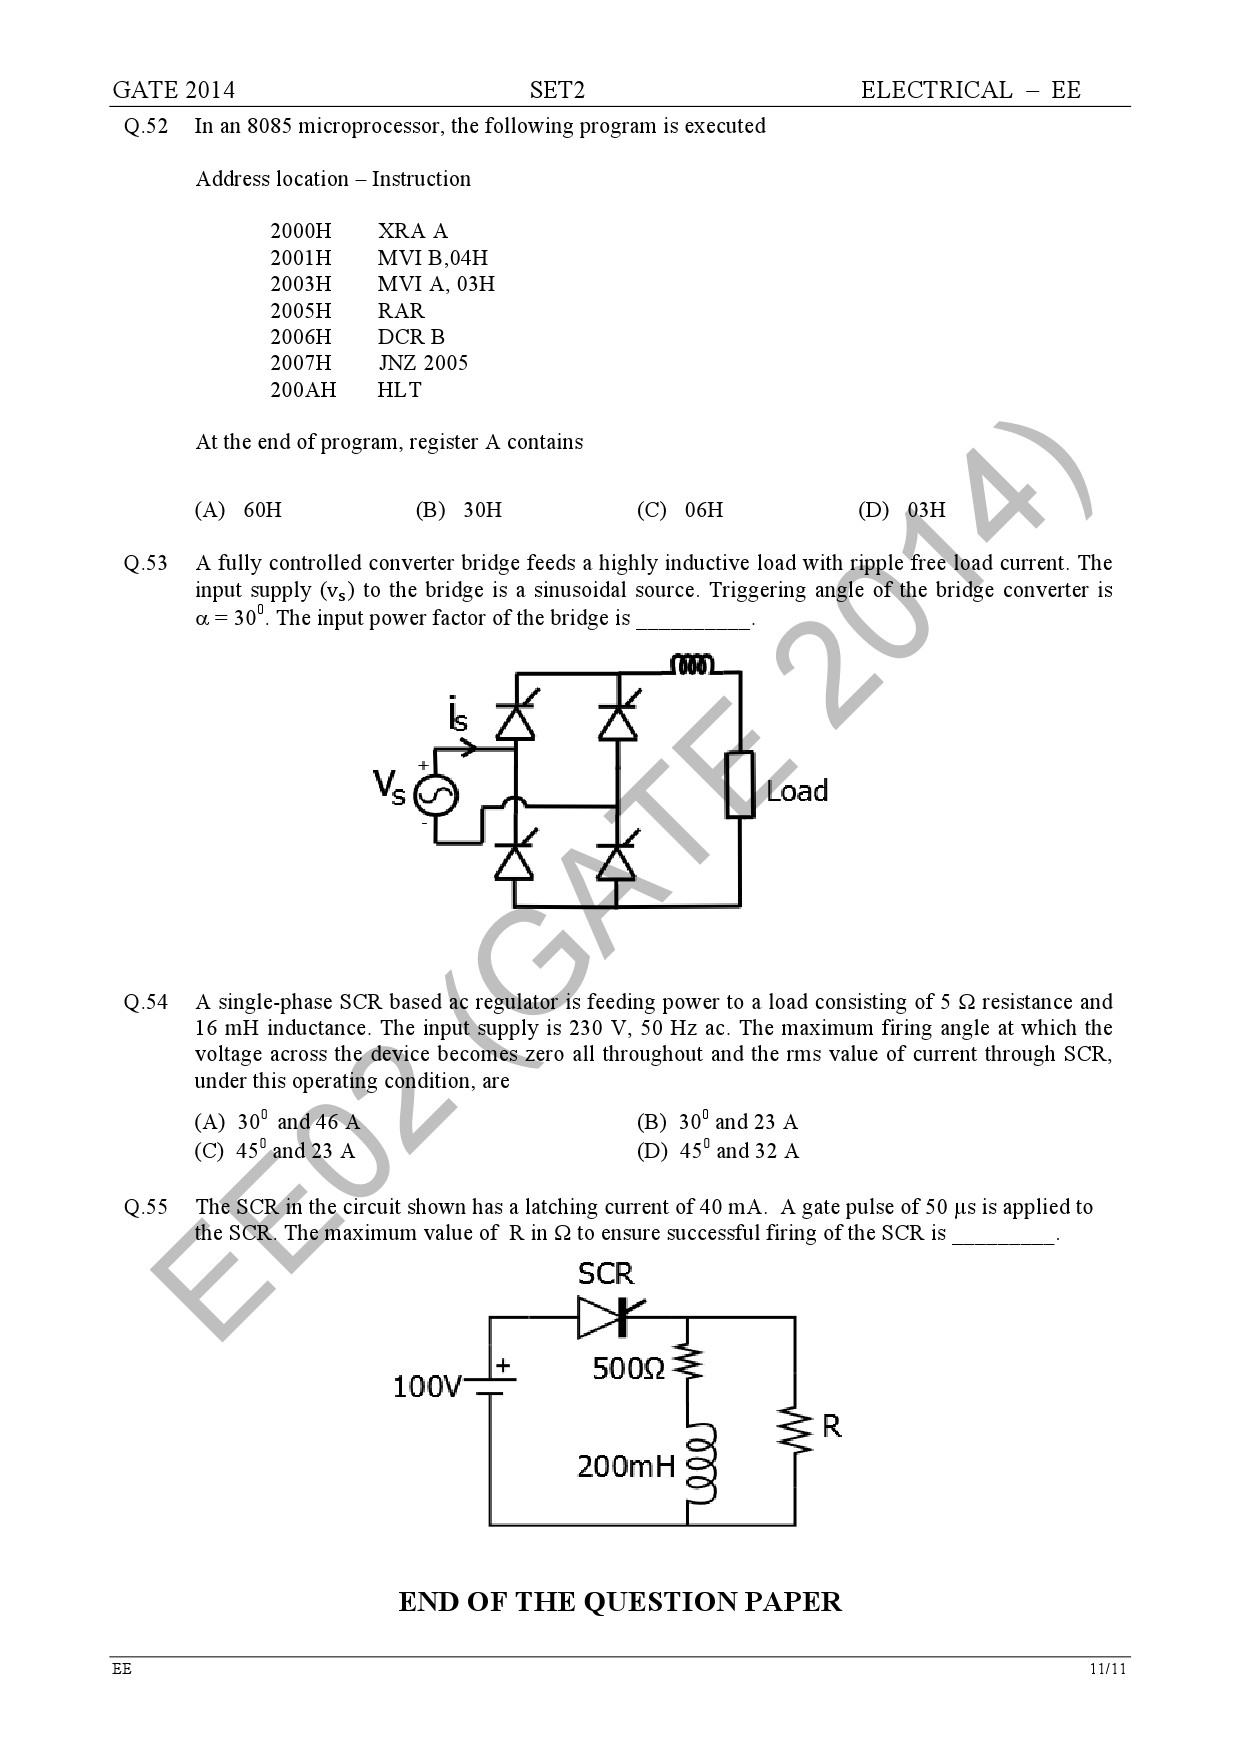 GATE Exam Question Paper 2014 Electrical Engineering Set 2 17